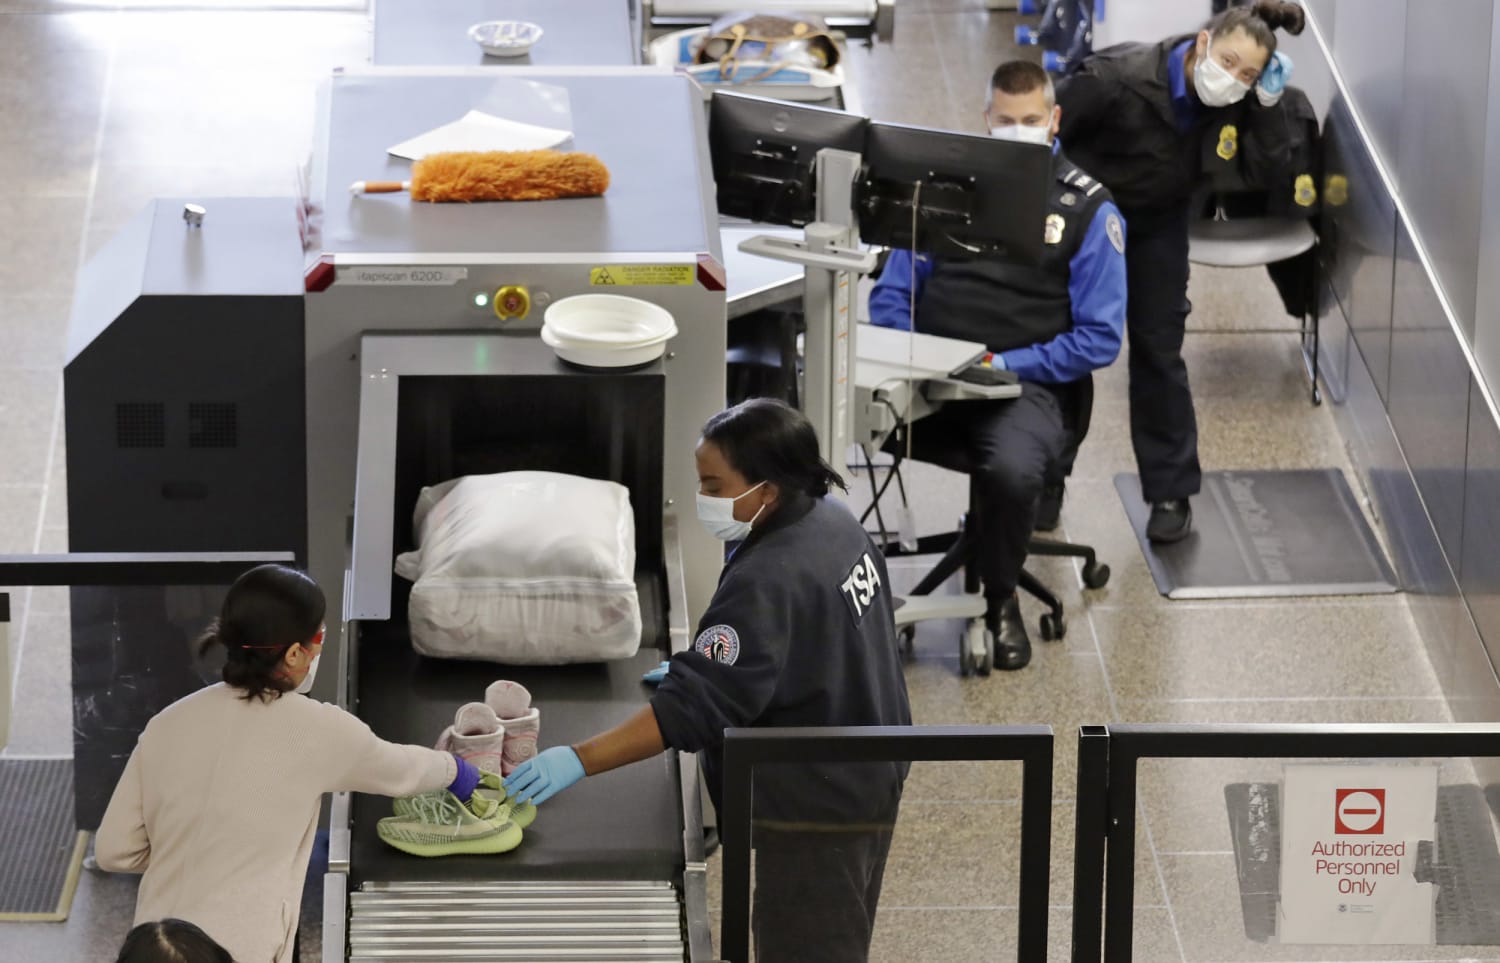 TSA says 500 of its employees have tested positive for COVID-19